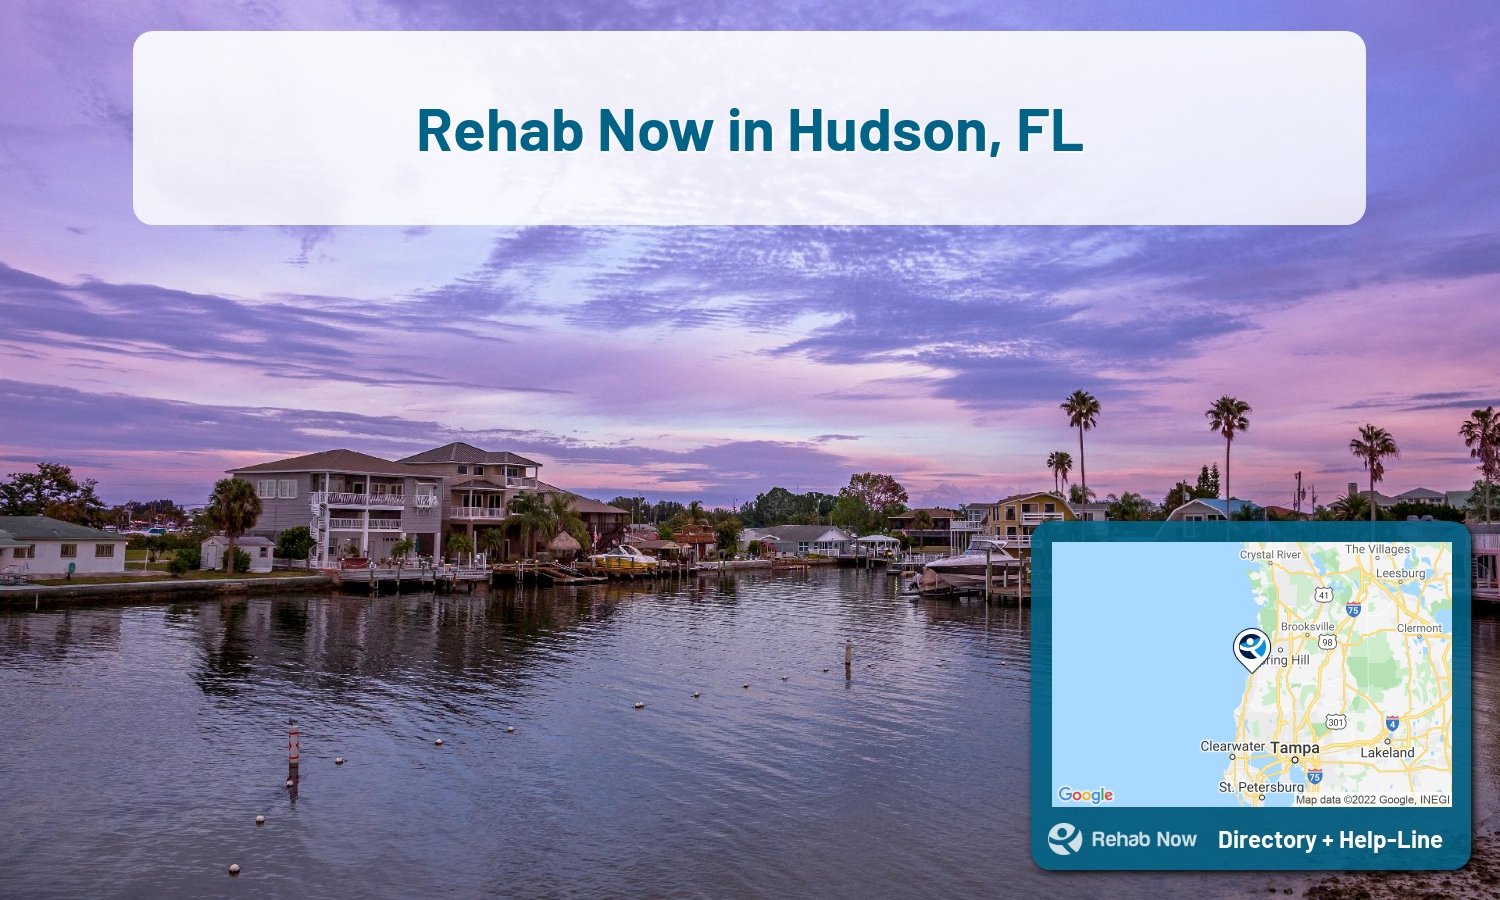 Hudson, FL Treatment Centers. Find drug rehab in Hudson, Florida, or detox and treatment programs. Get the right help now!